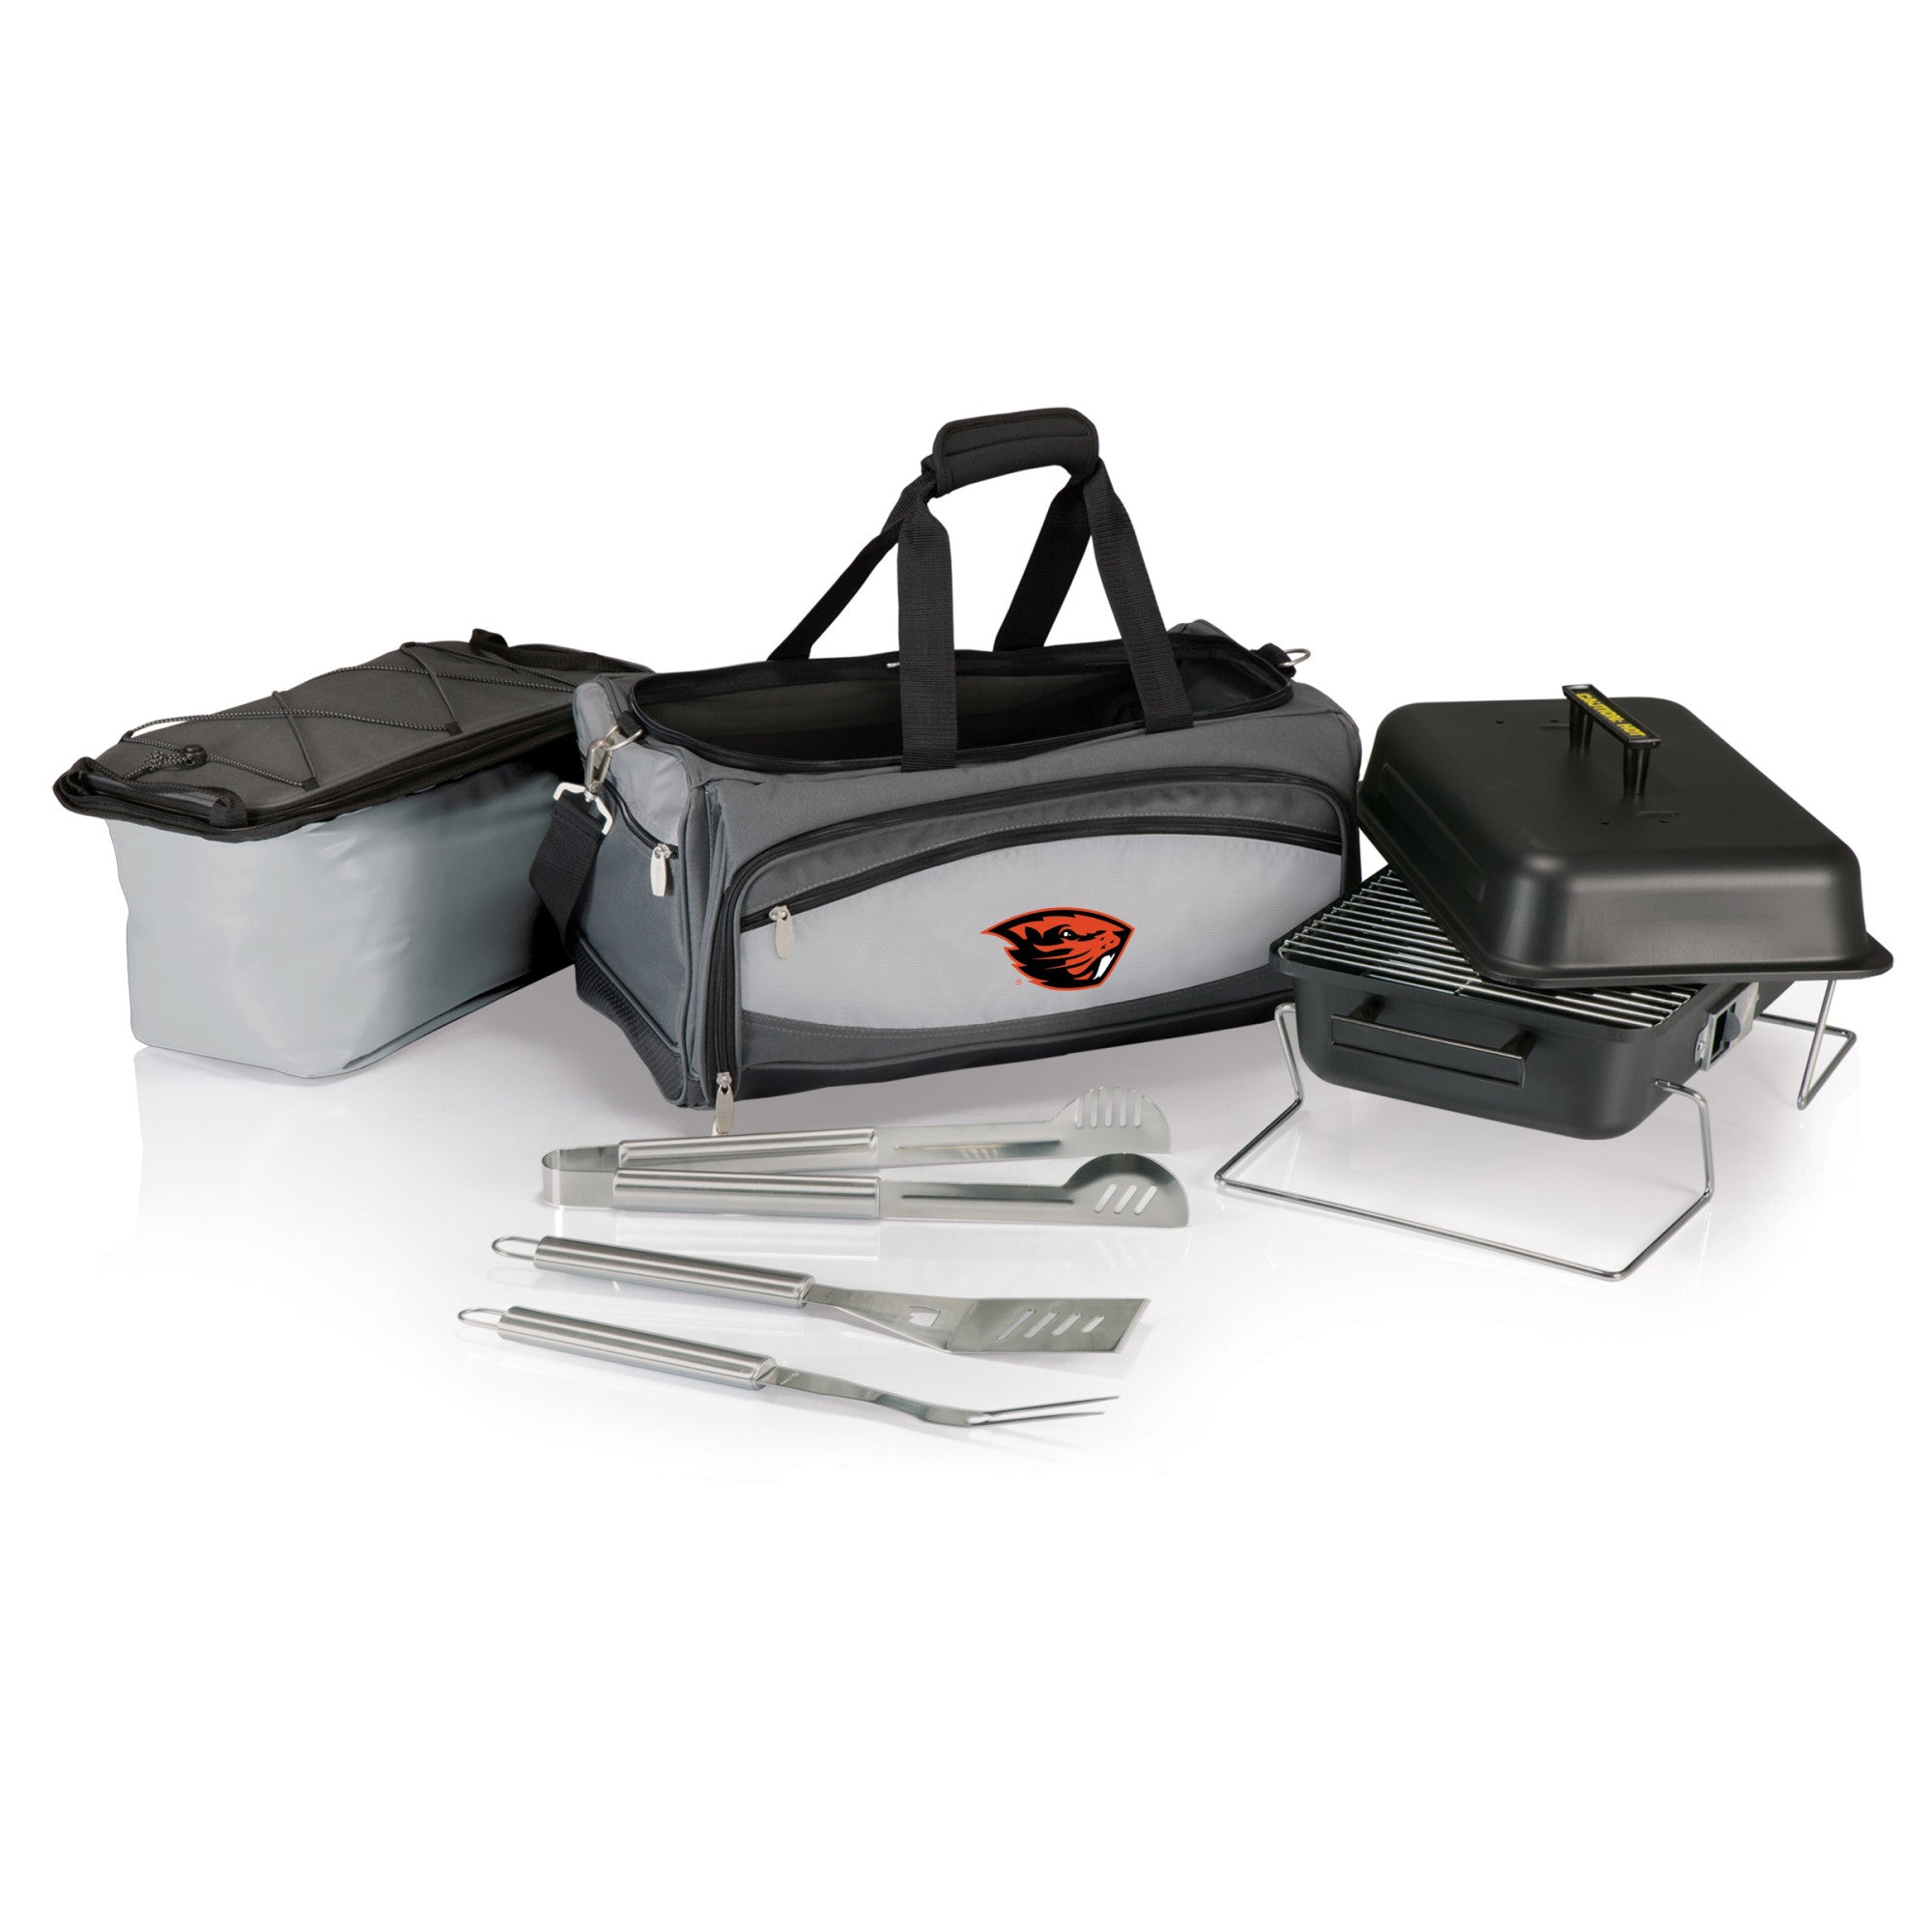 Oregon State Beavers - Buccaneer Portable Charcoal Grill & Cooler Tote